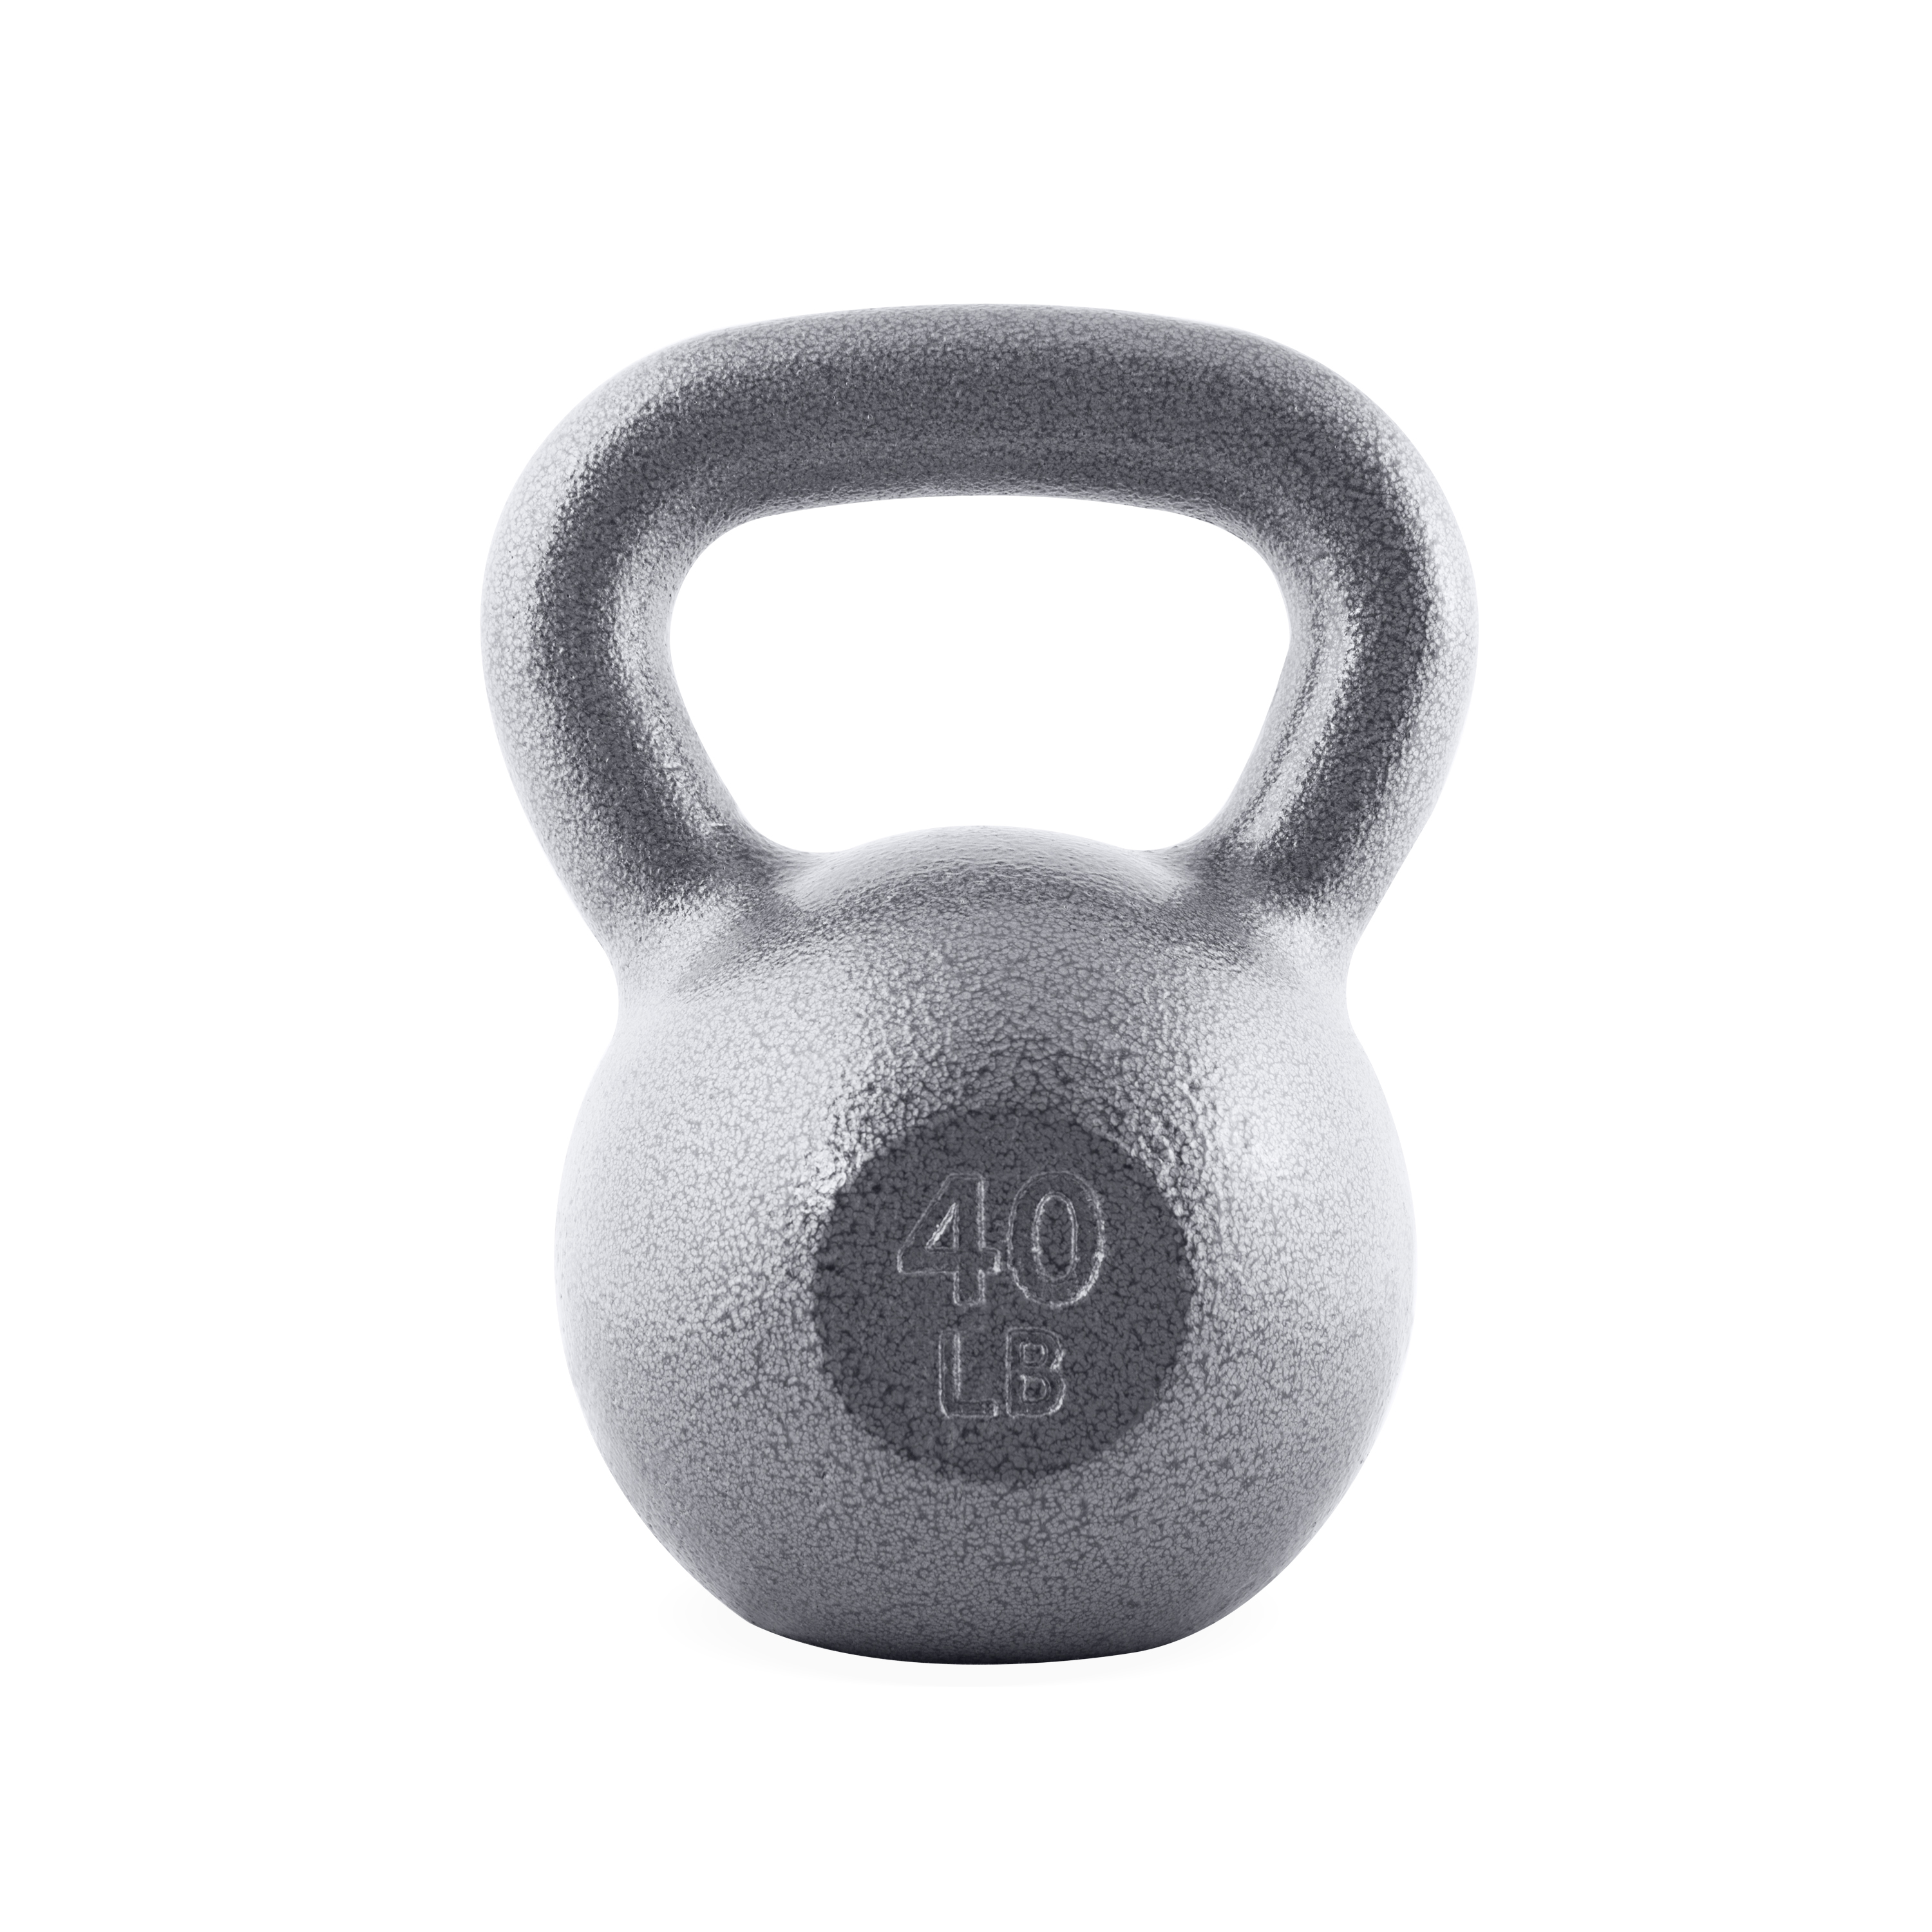 CAP Barbell Cast Iron Kettlebell, Single, 40-Pounds - image 1 of 8